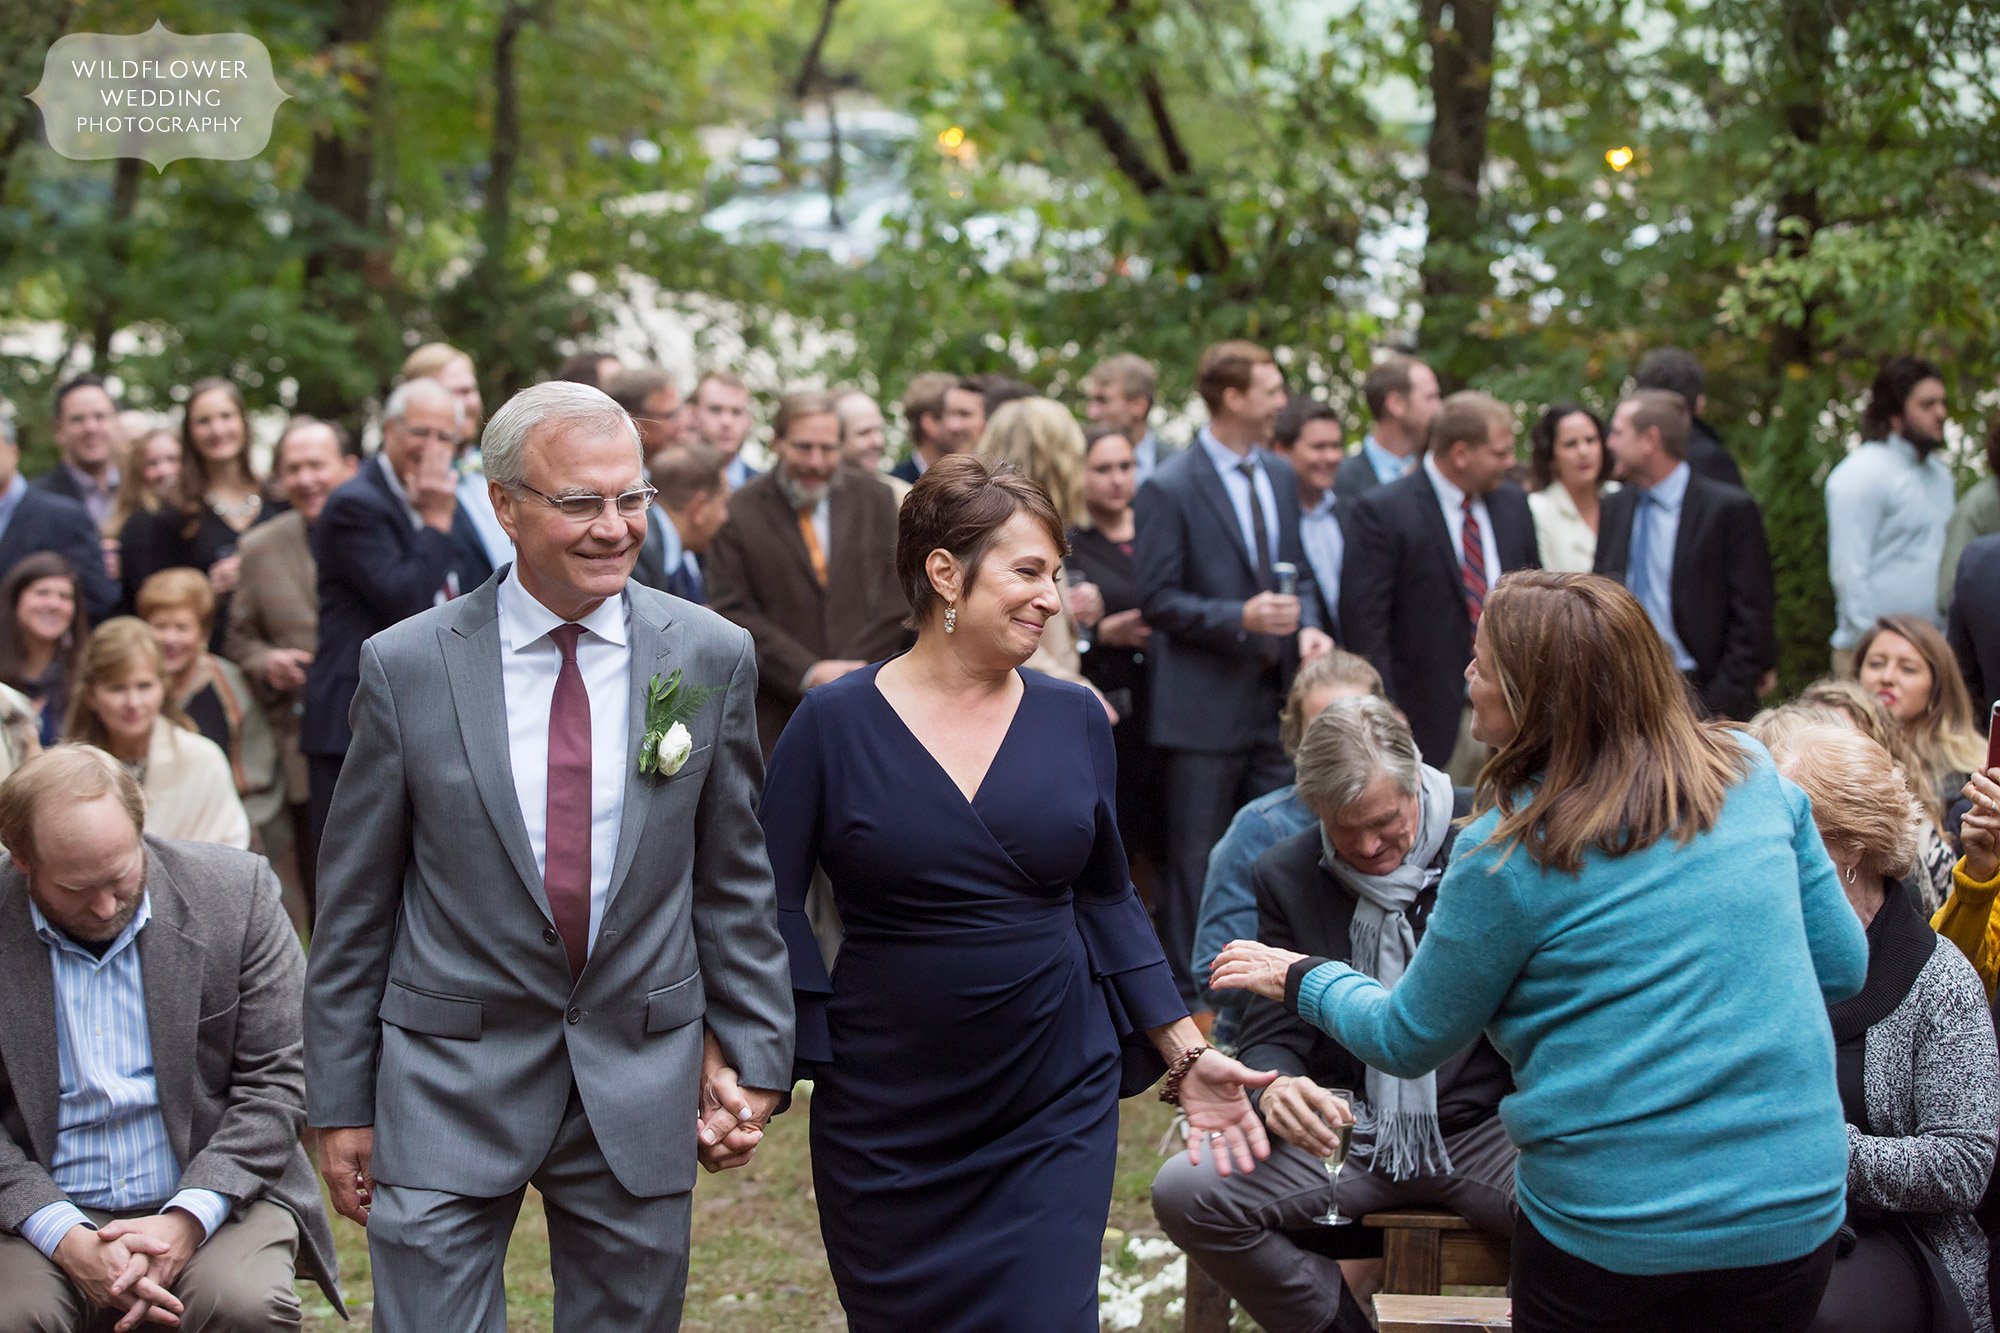 The parents of the groom walk down the aisle at Little Piney.